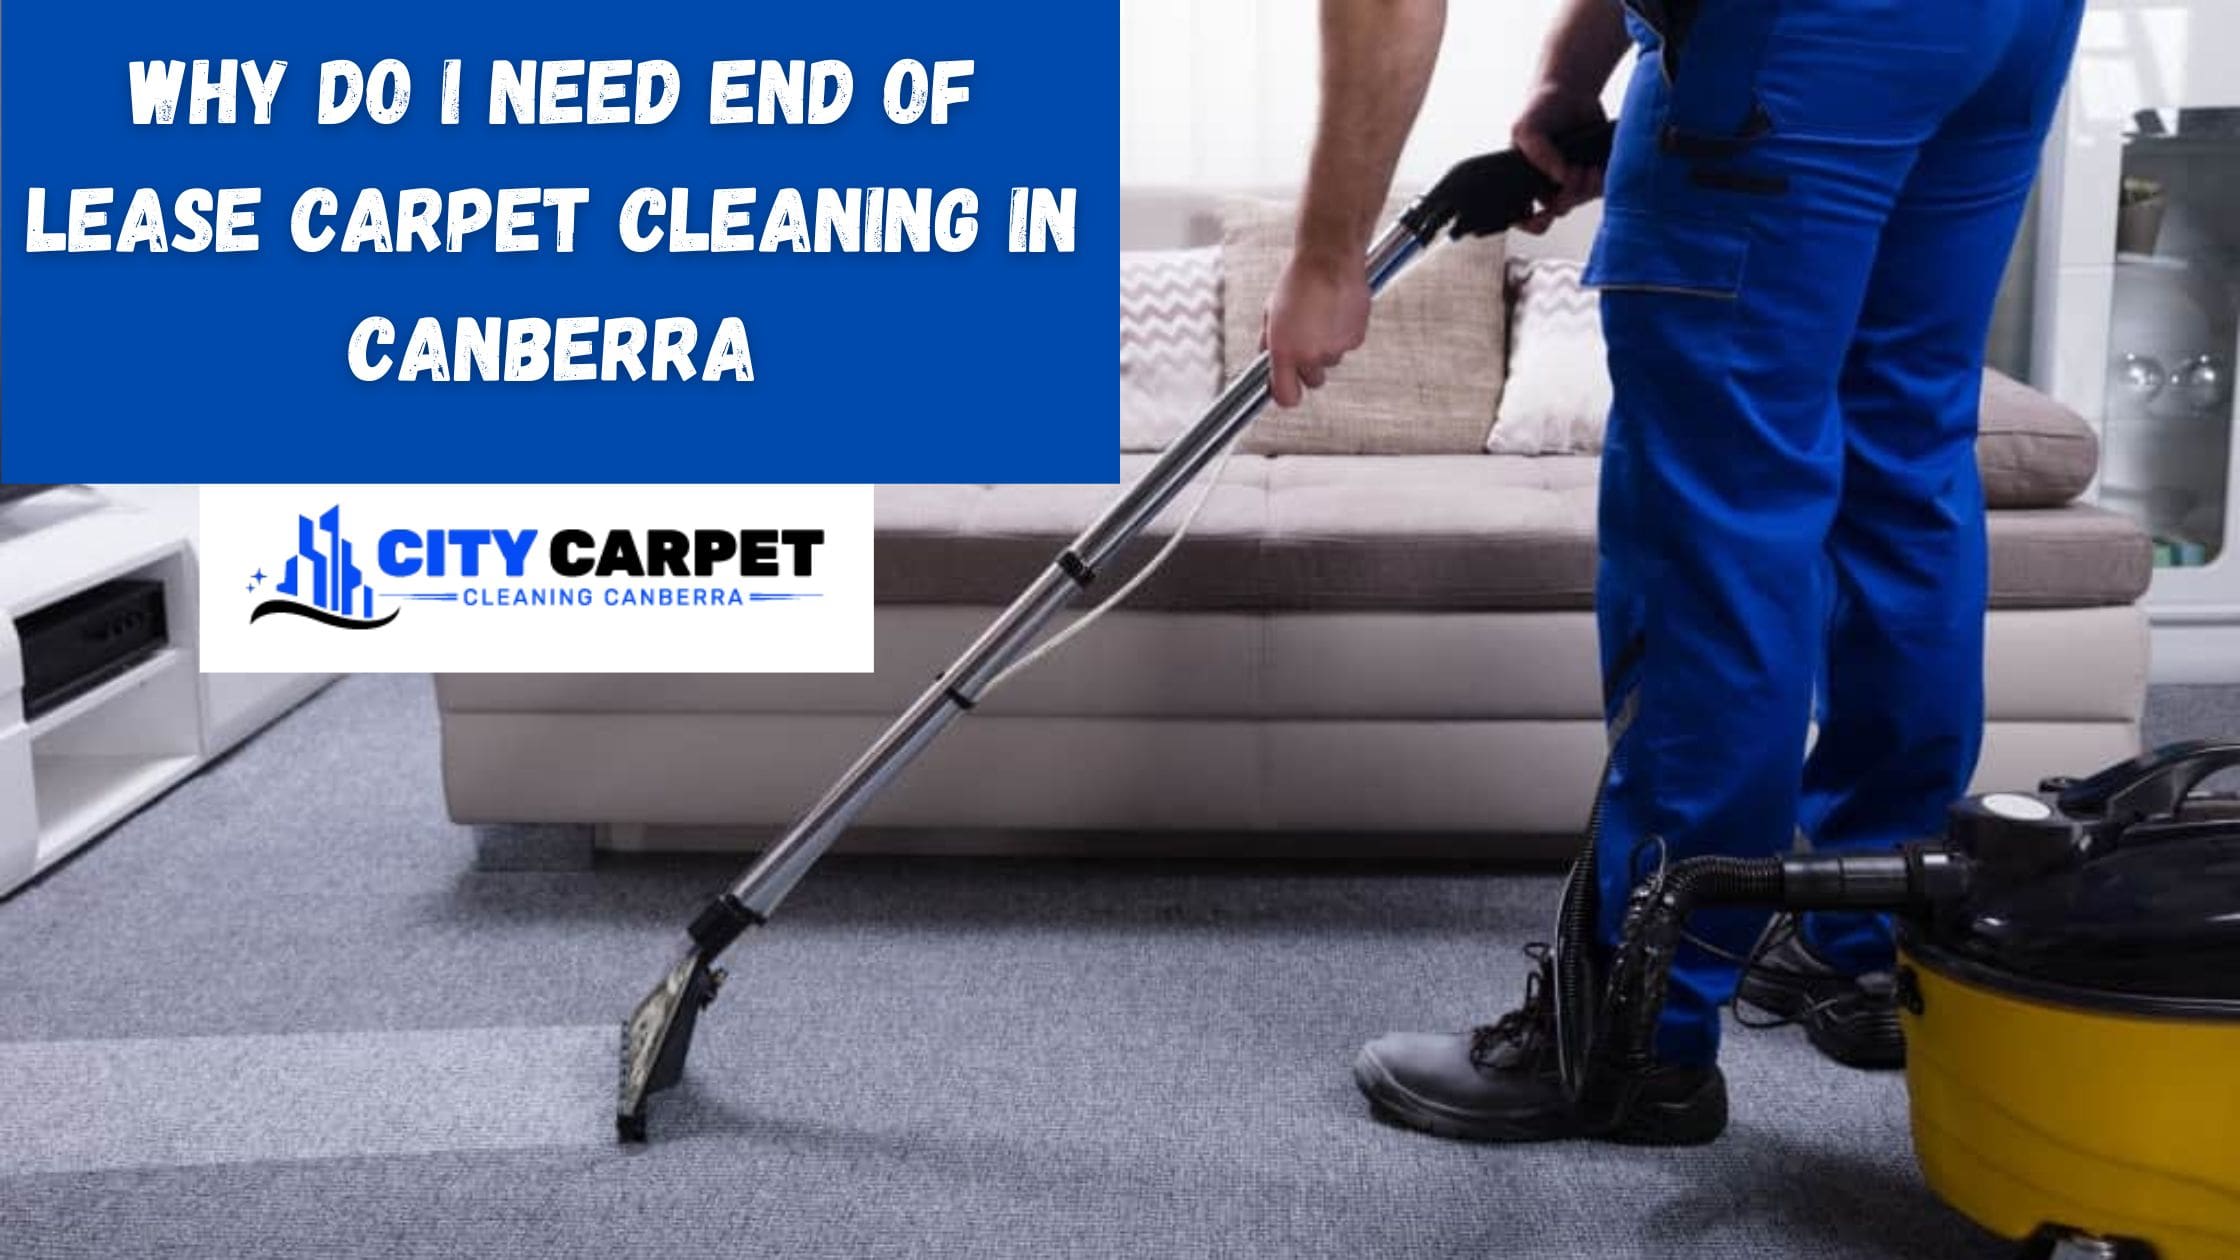 Why Do I Need End Of Lease Carpet Cleaning in Canberra